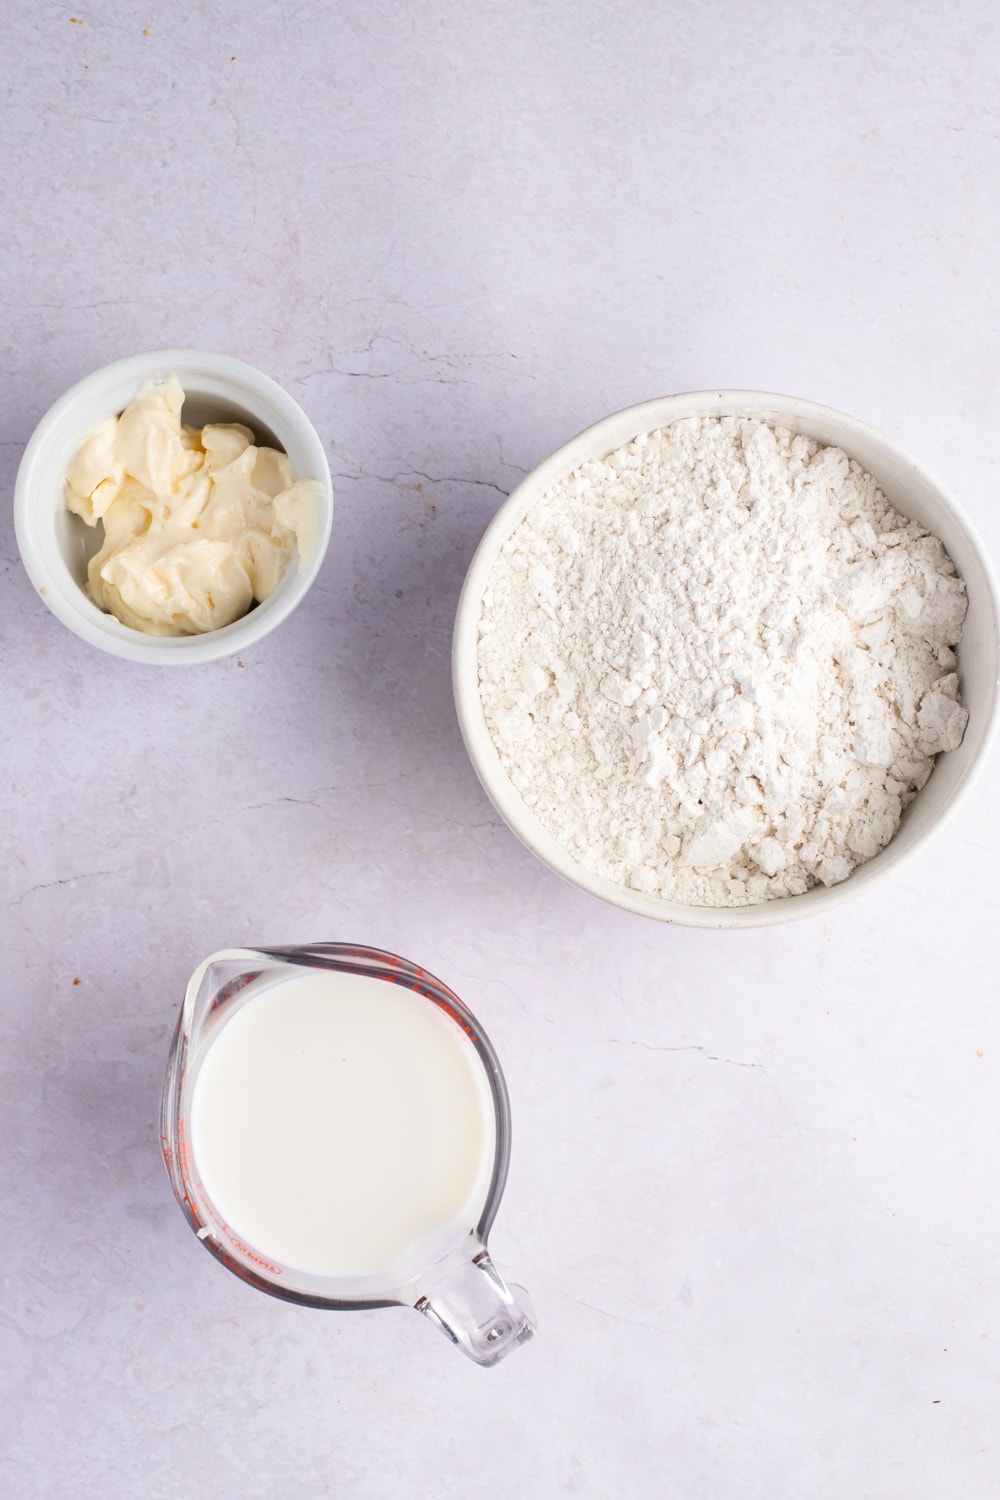 Mayonnaise Biscuit Ingredients - Mayonnaise, Self-Rising Flour and Whole Milk